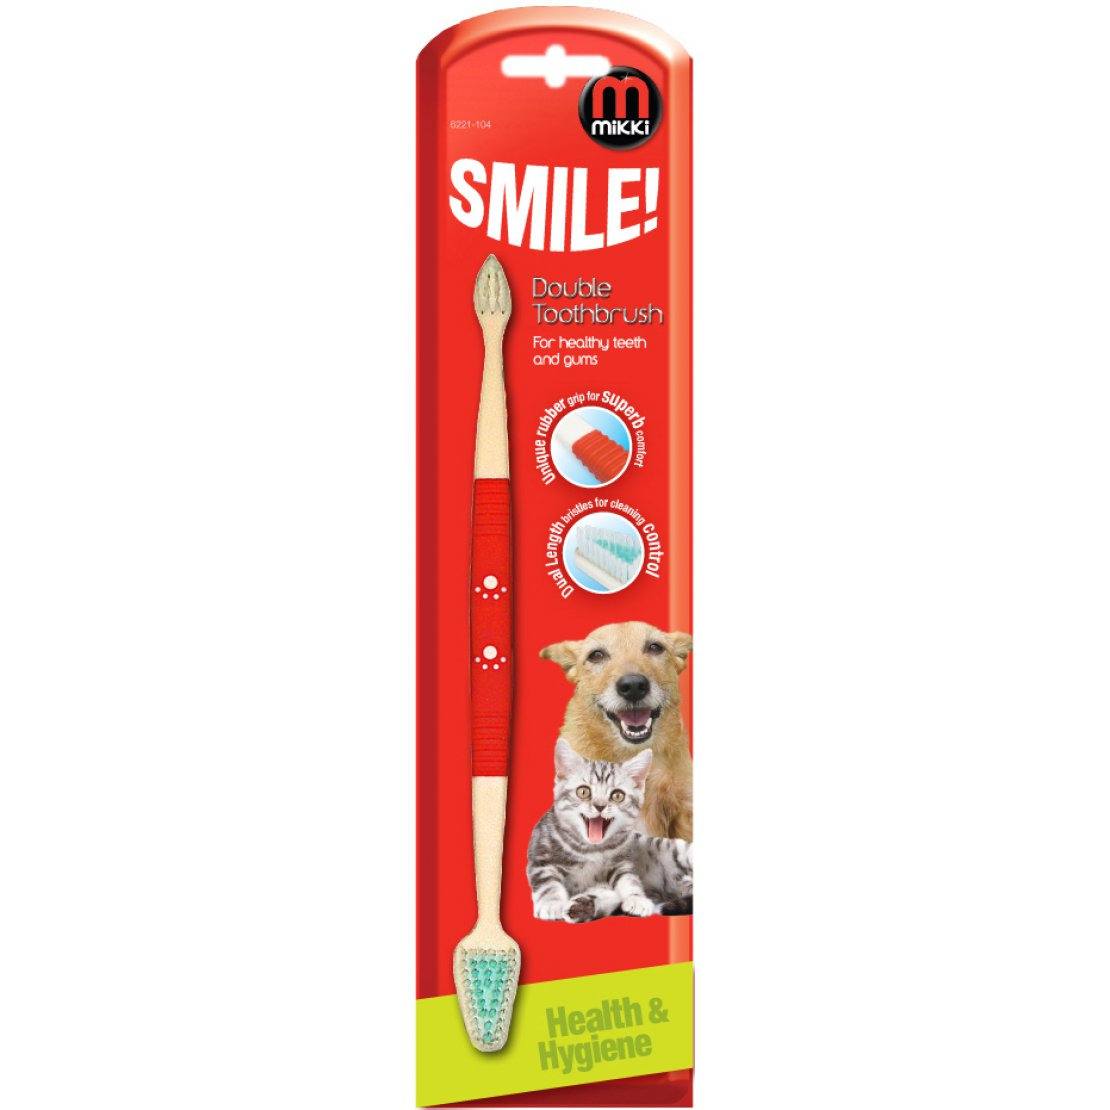 Mikki Double Ended Toothbrush for Dogs and Cats